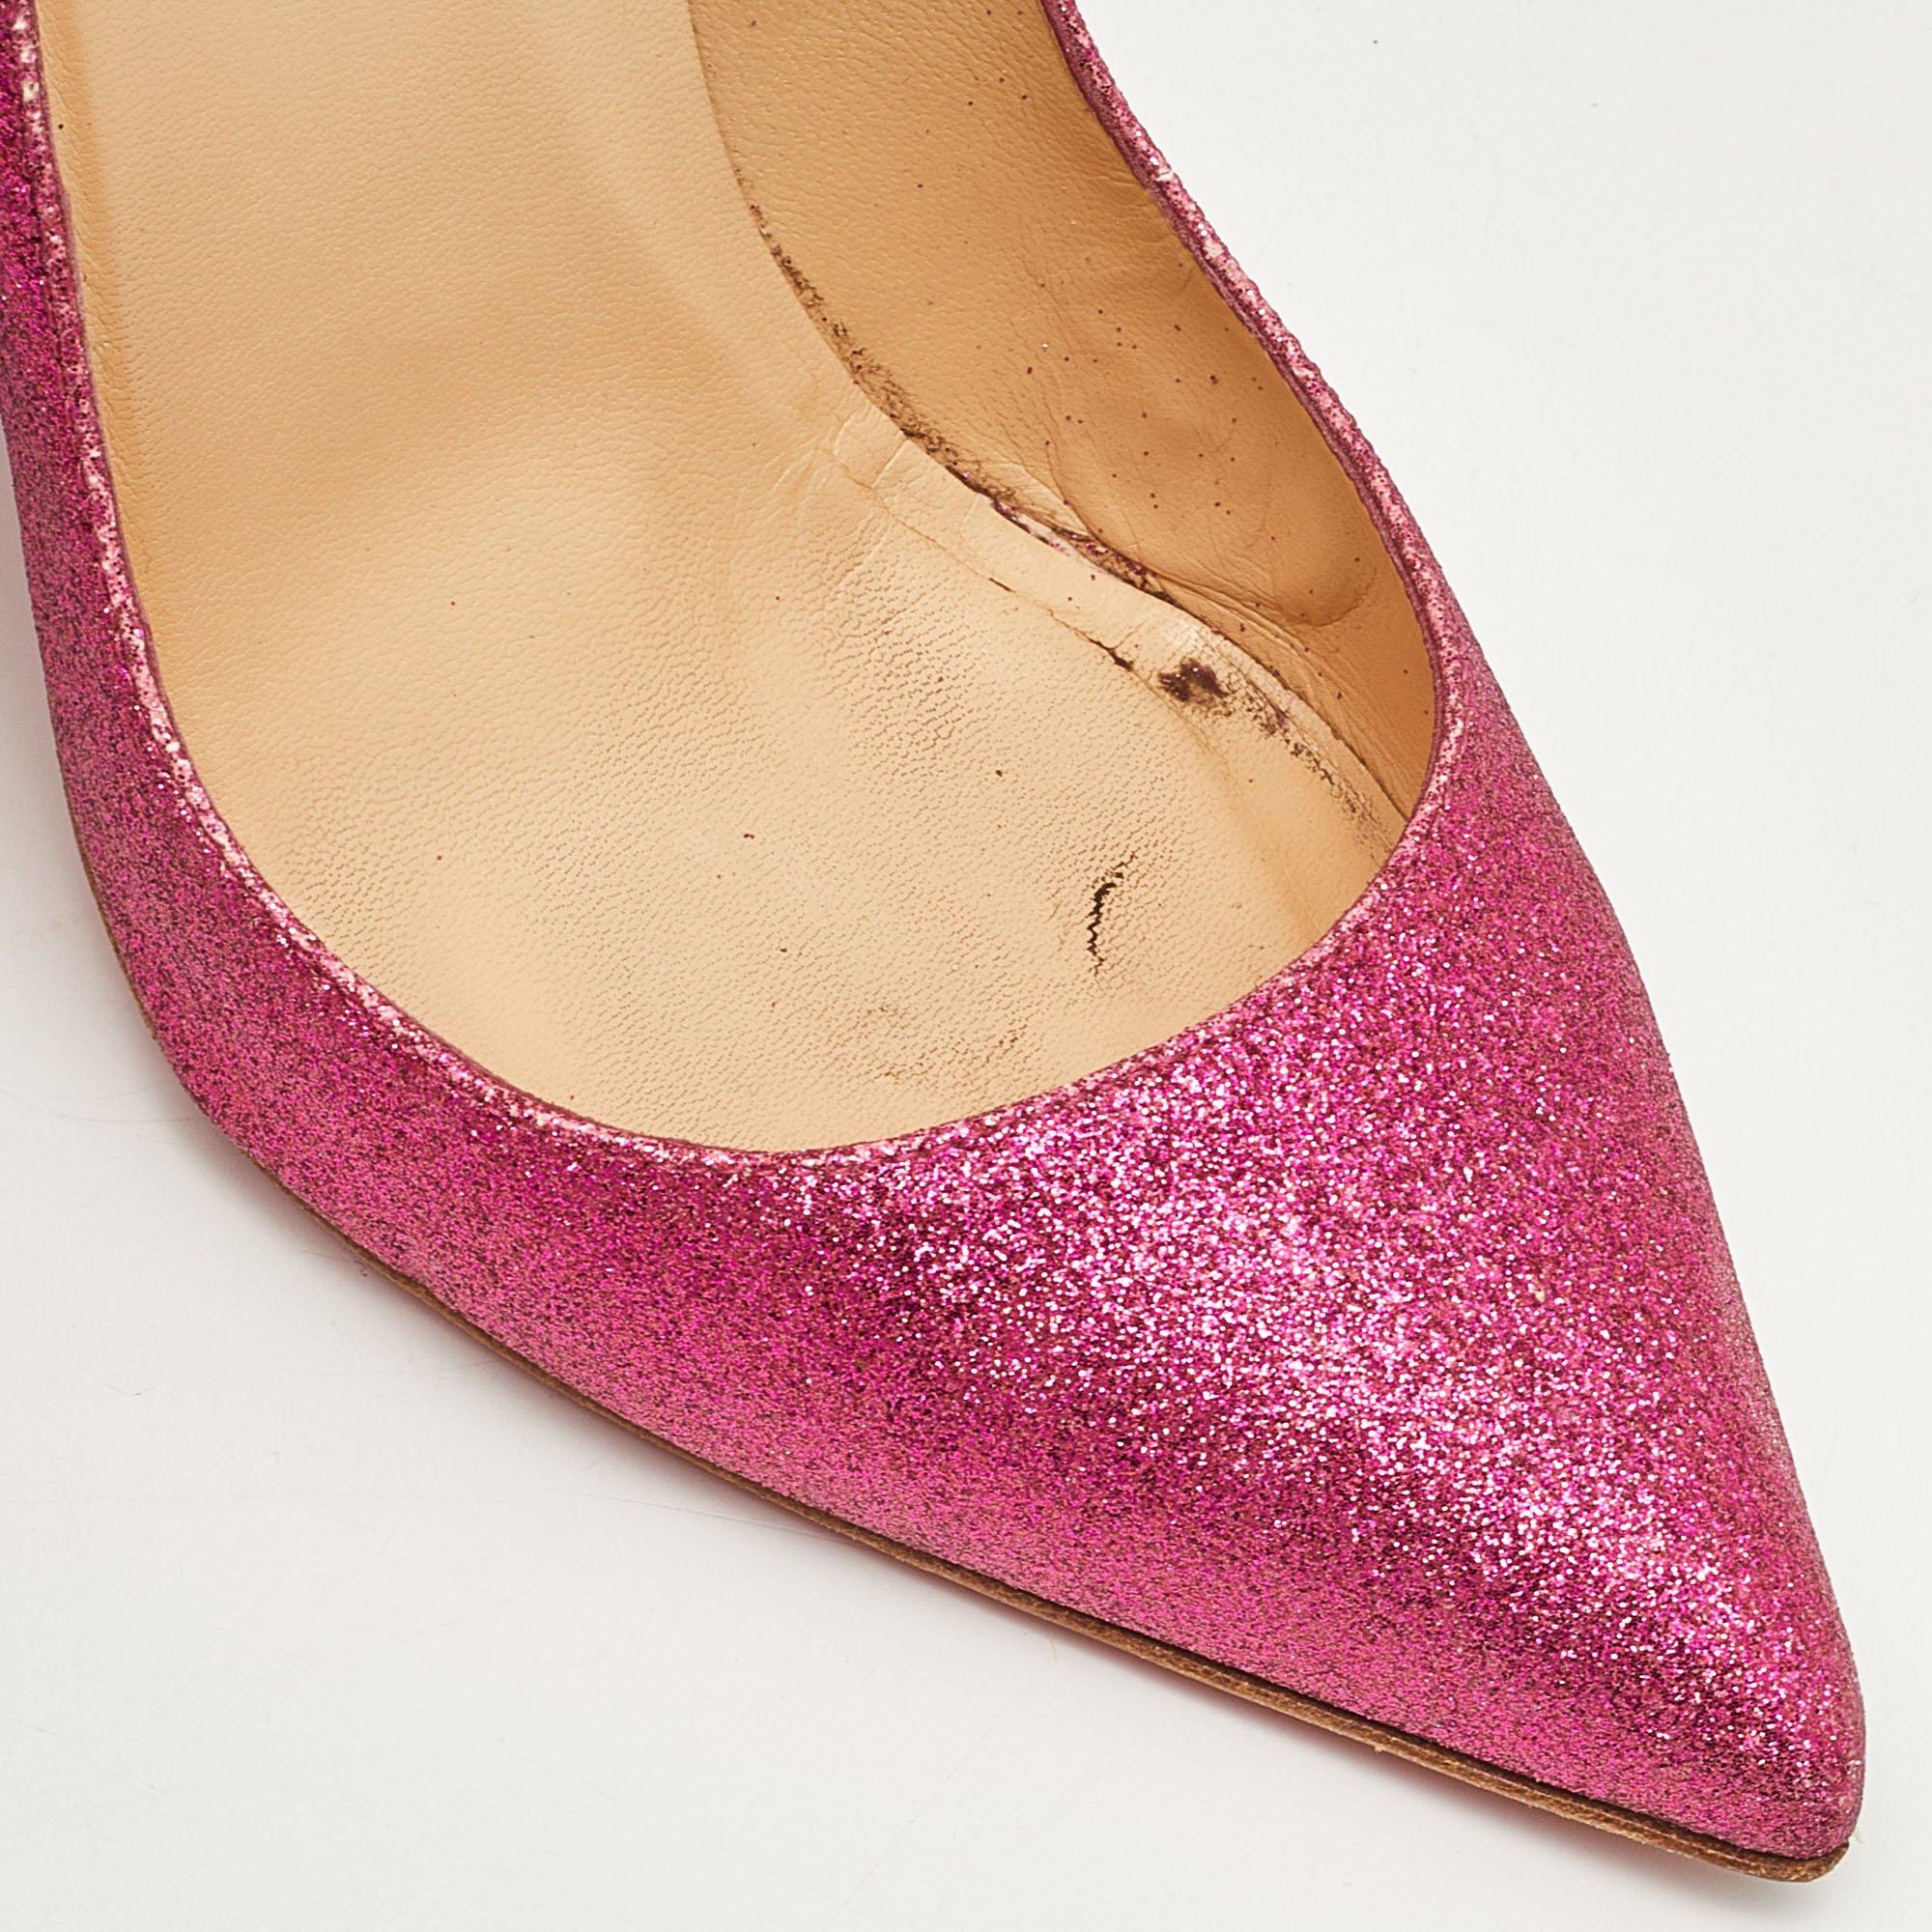 Christian Louboutin Pink Glitter Pigalle Pumps Size 39.5